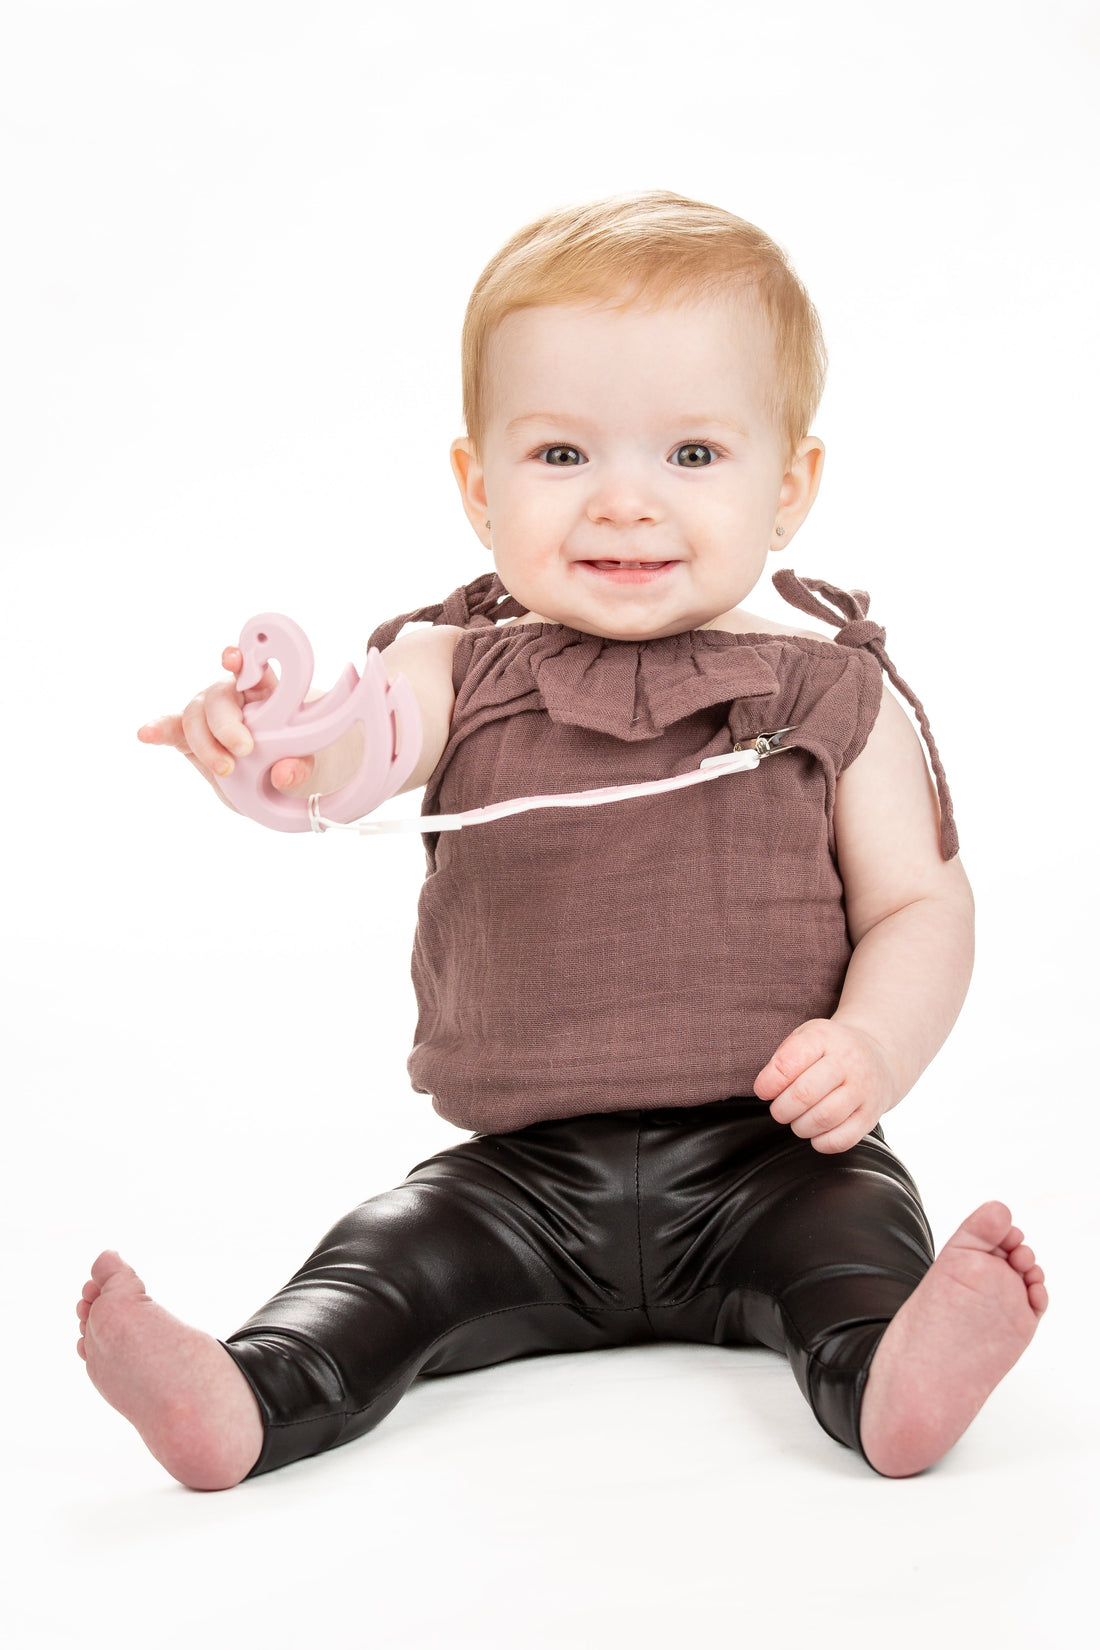 How to Choose the Right Teething Toy for Your Baby